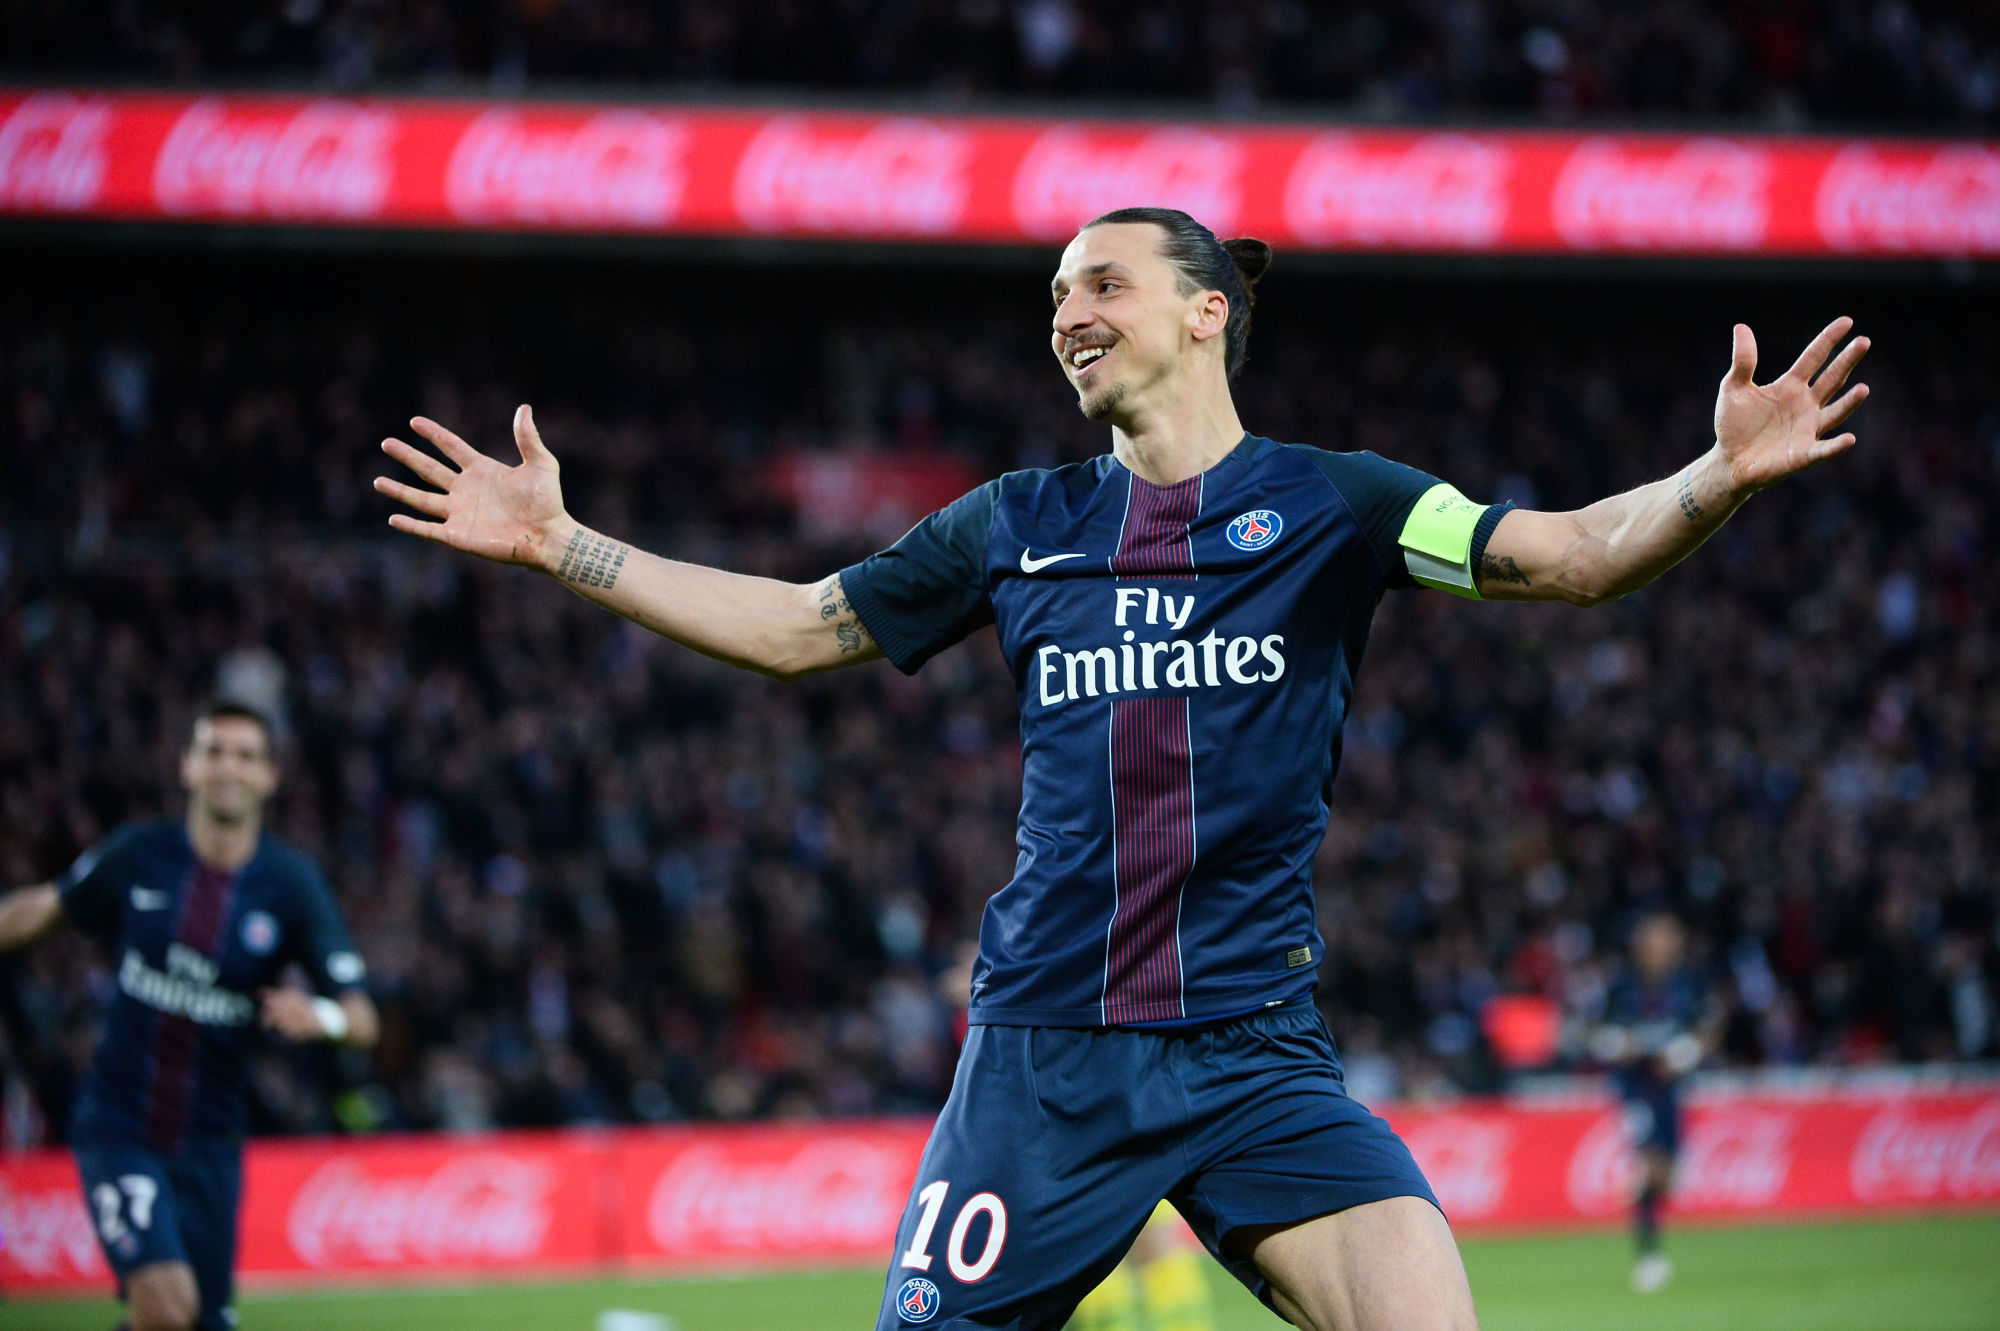 Zlatan Ibrahimovic of PSG celebrates his goal during the football french Ligue 1 match between Paris Saint-Germain and FC Nantes at Parc des Princes on May 14, 2016 in Paris, France. (Photo by Nolwenn